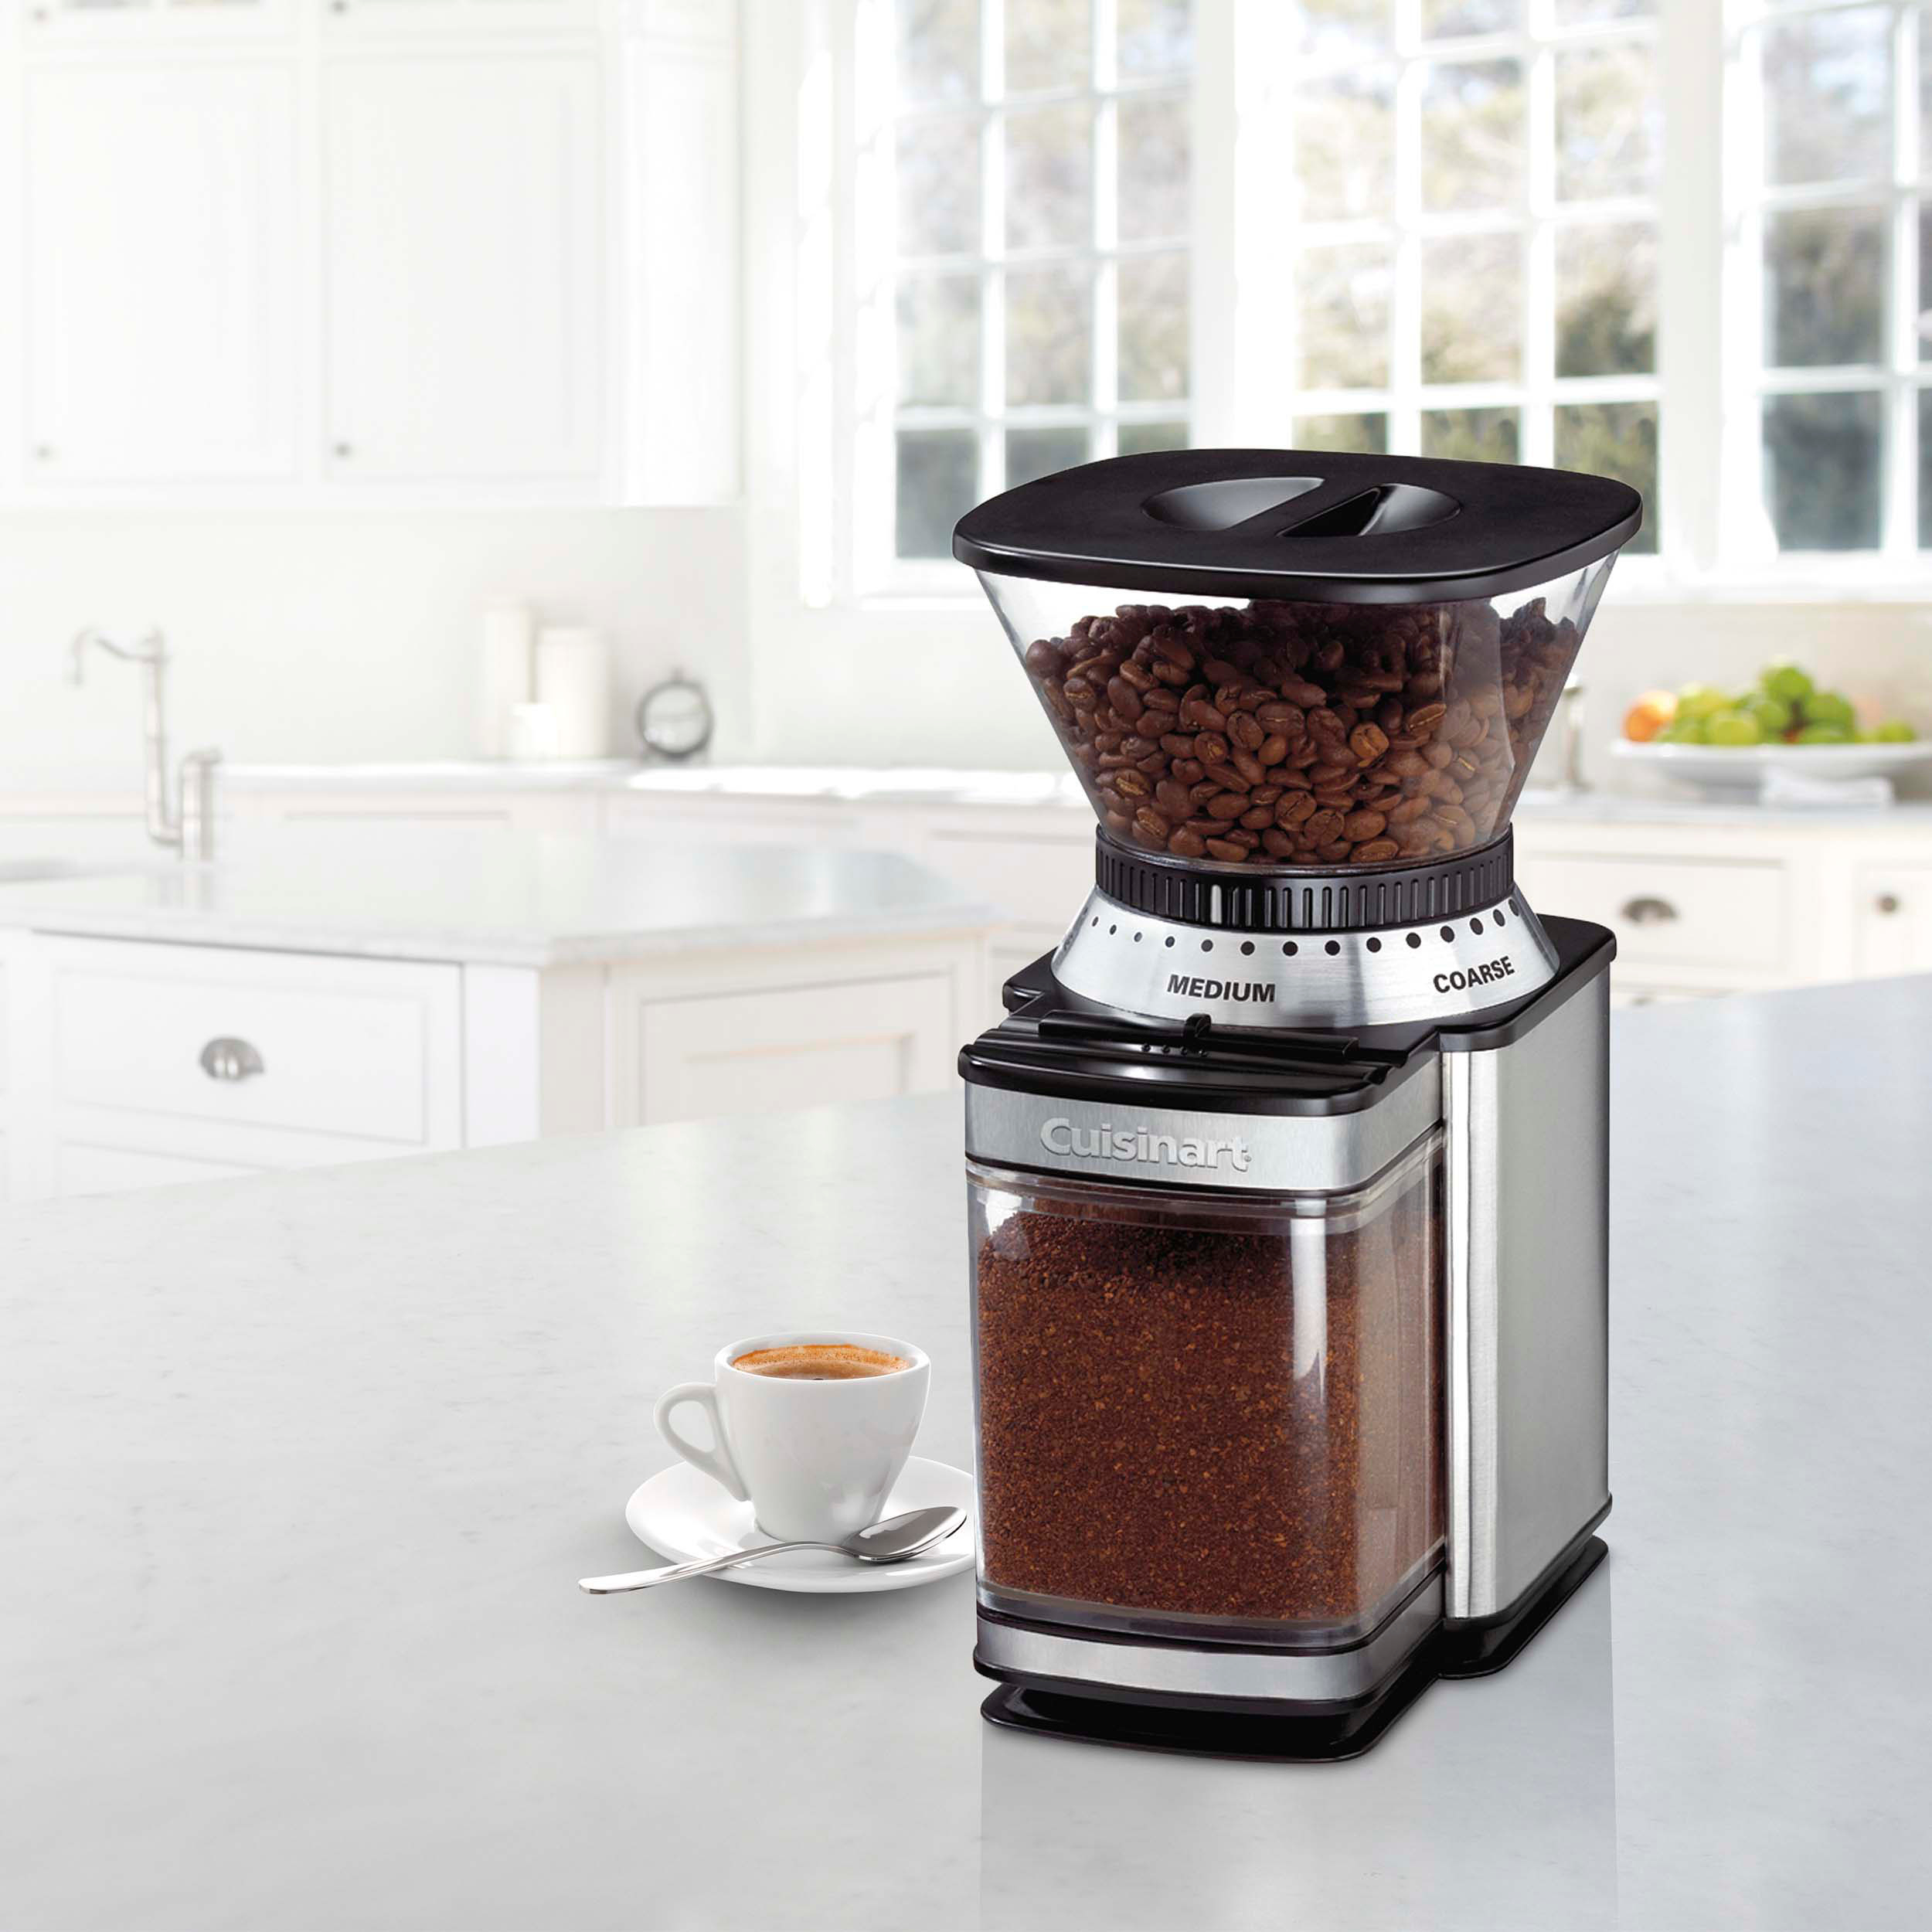 Mr. Coffee Stainless Steel Automatic Burr Mill Grinder 72179231738